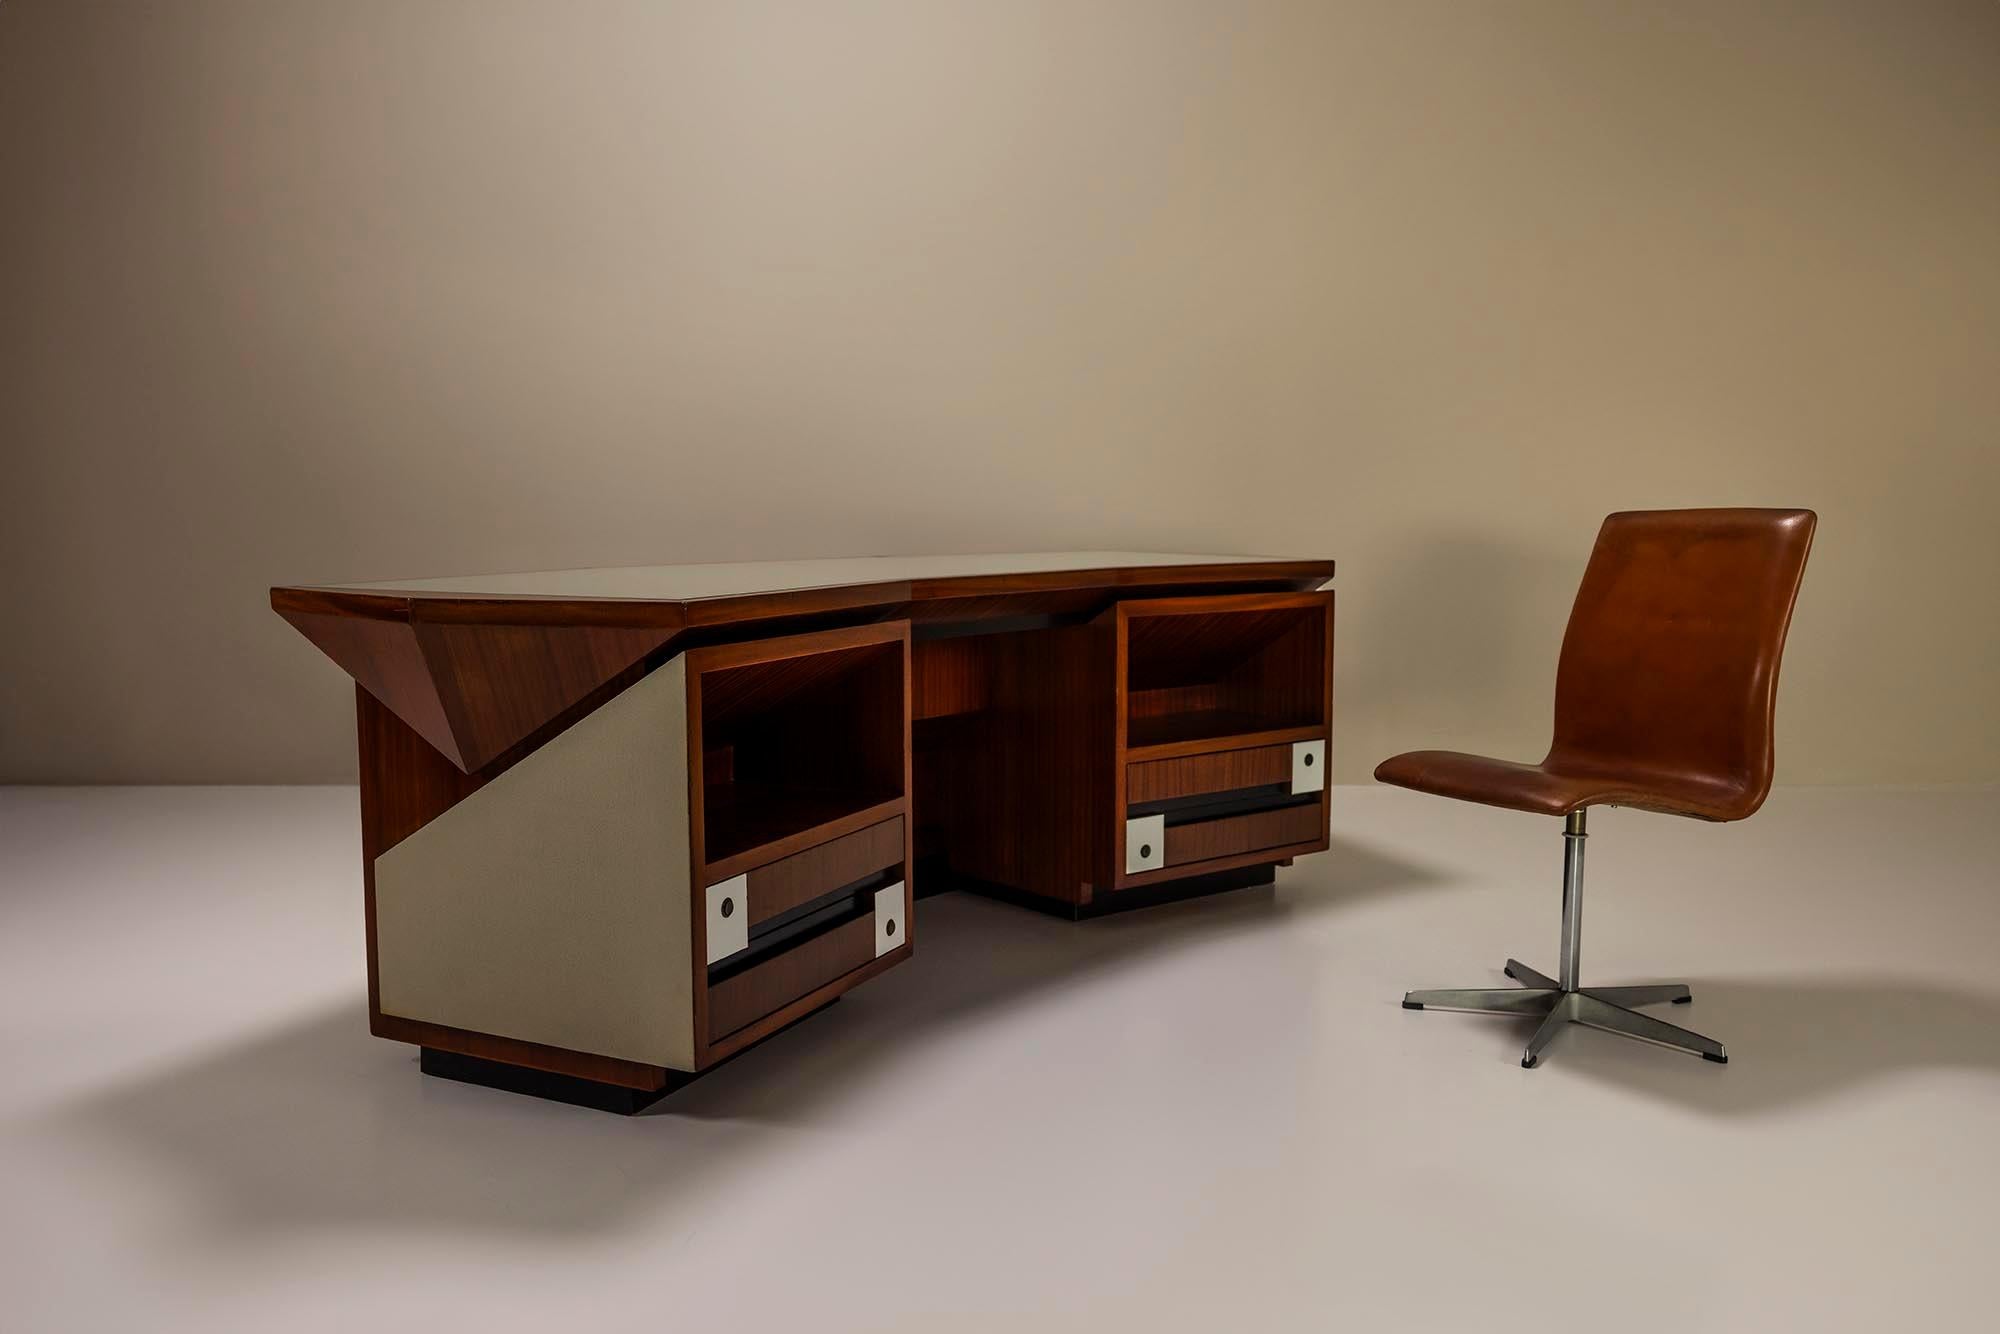 Italian Architectural Desk In Mahogany And Relief Textured Leather, Italy 1960's